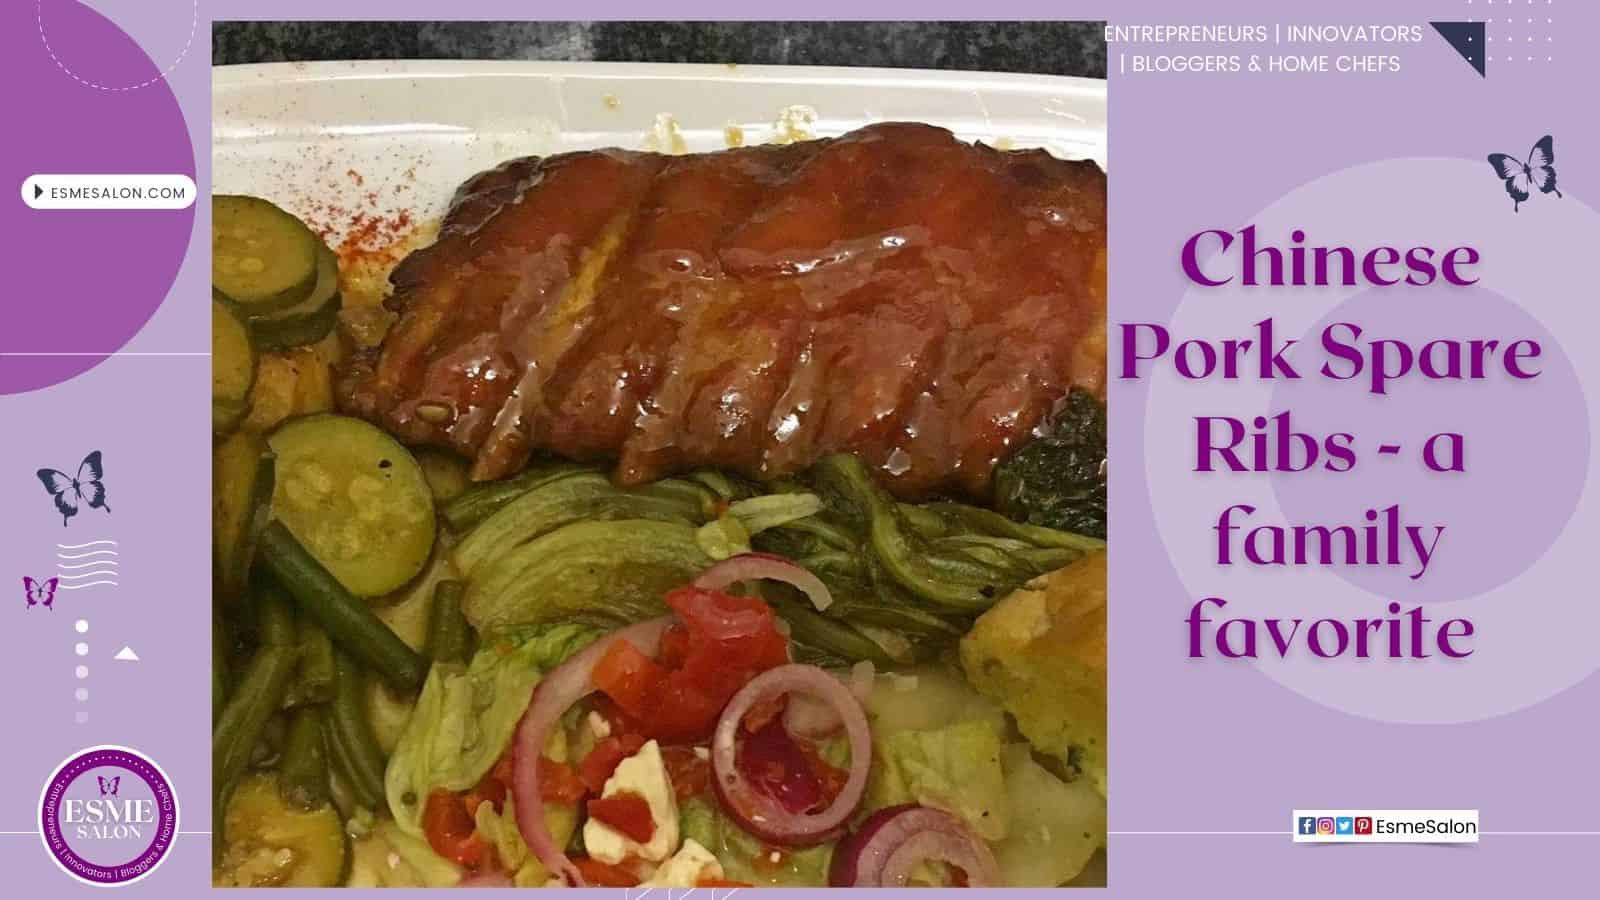 An image of a plate with Chinese Pork Spare Ribs and veggies